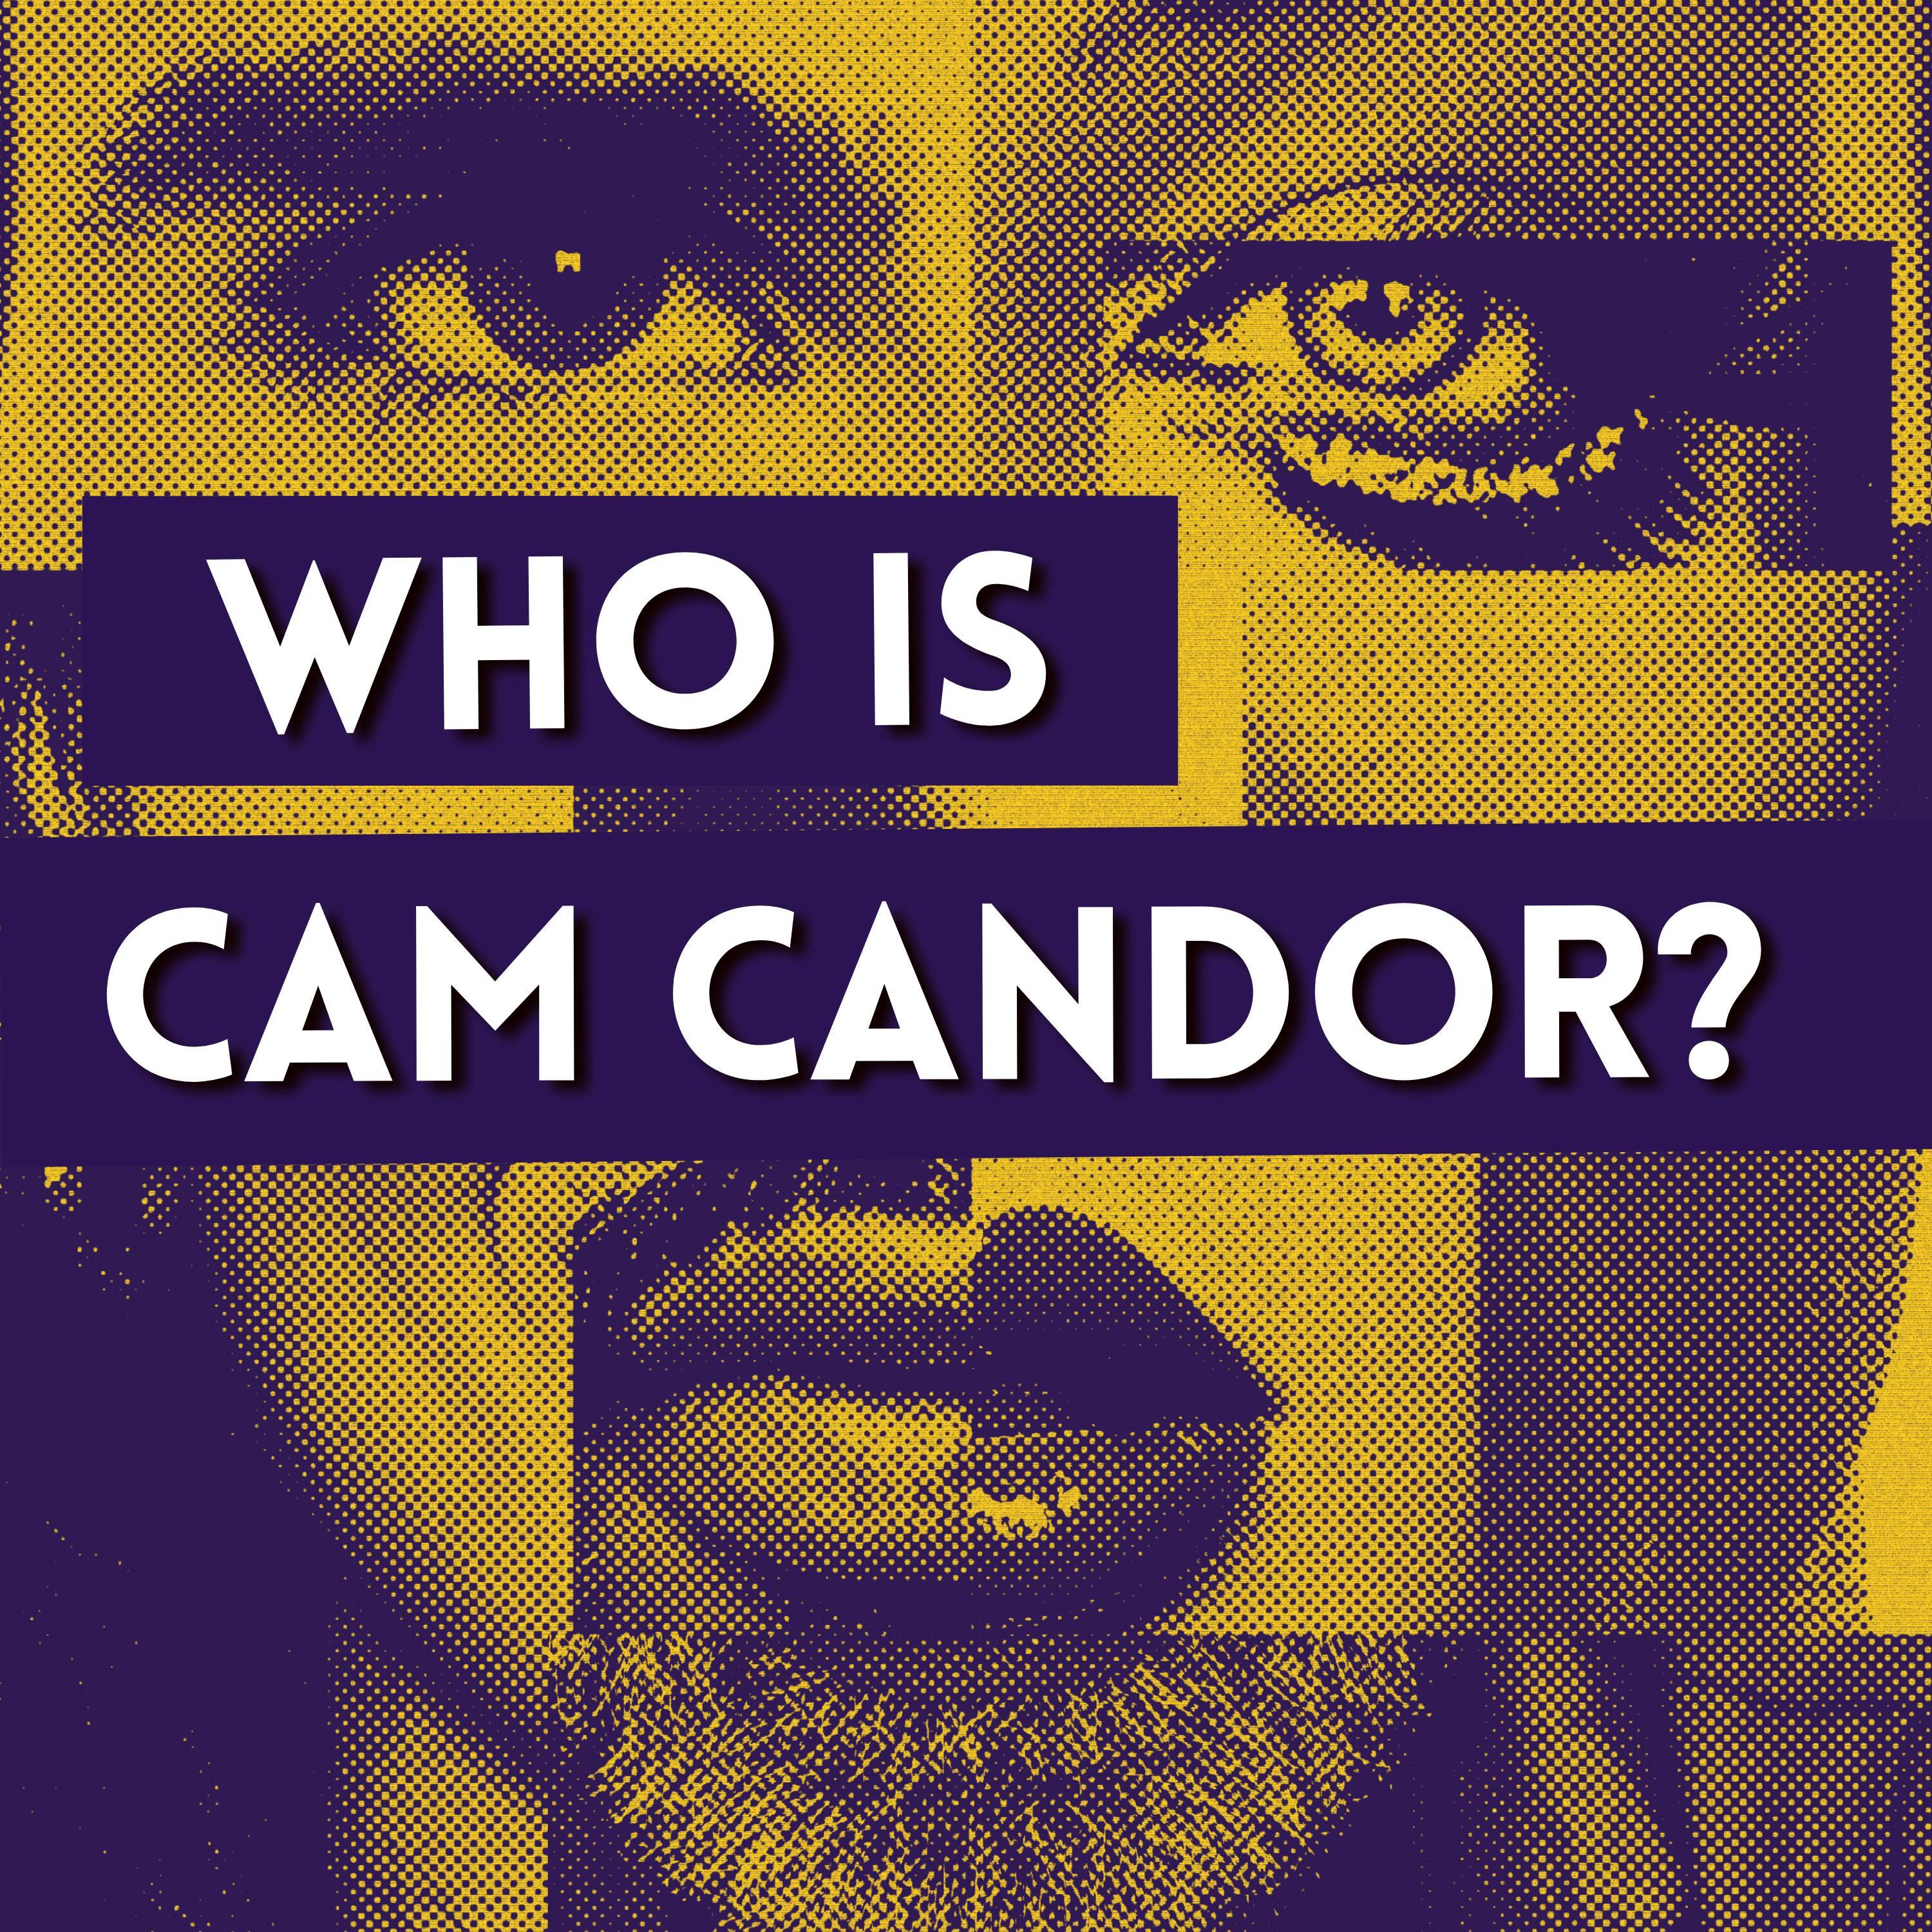 Presenting: Who is Cam Candor? -- ”The Search Begins”